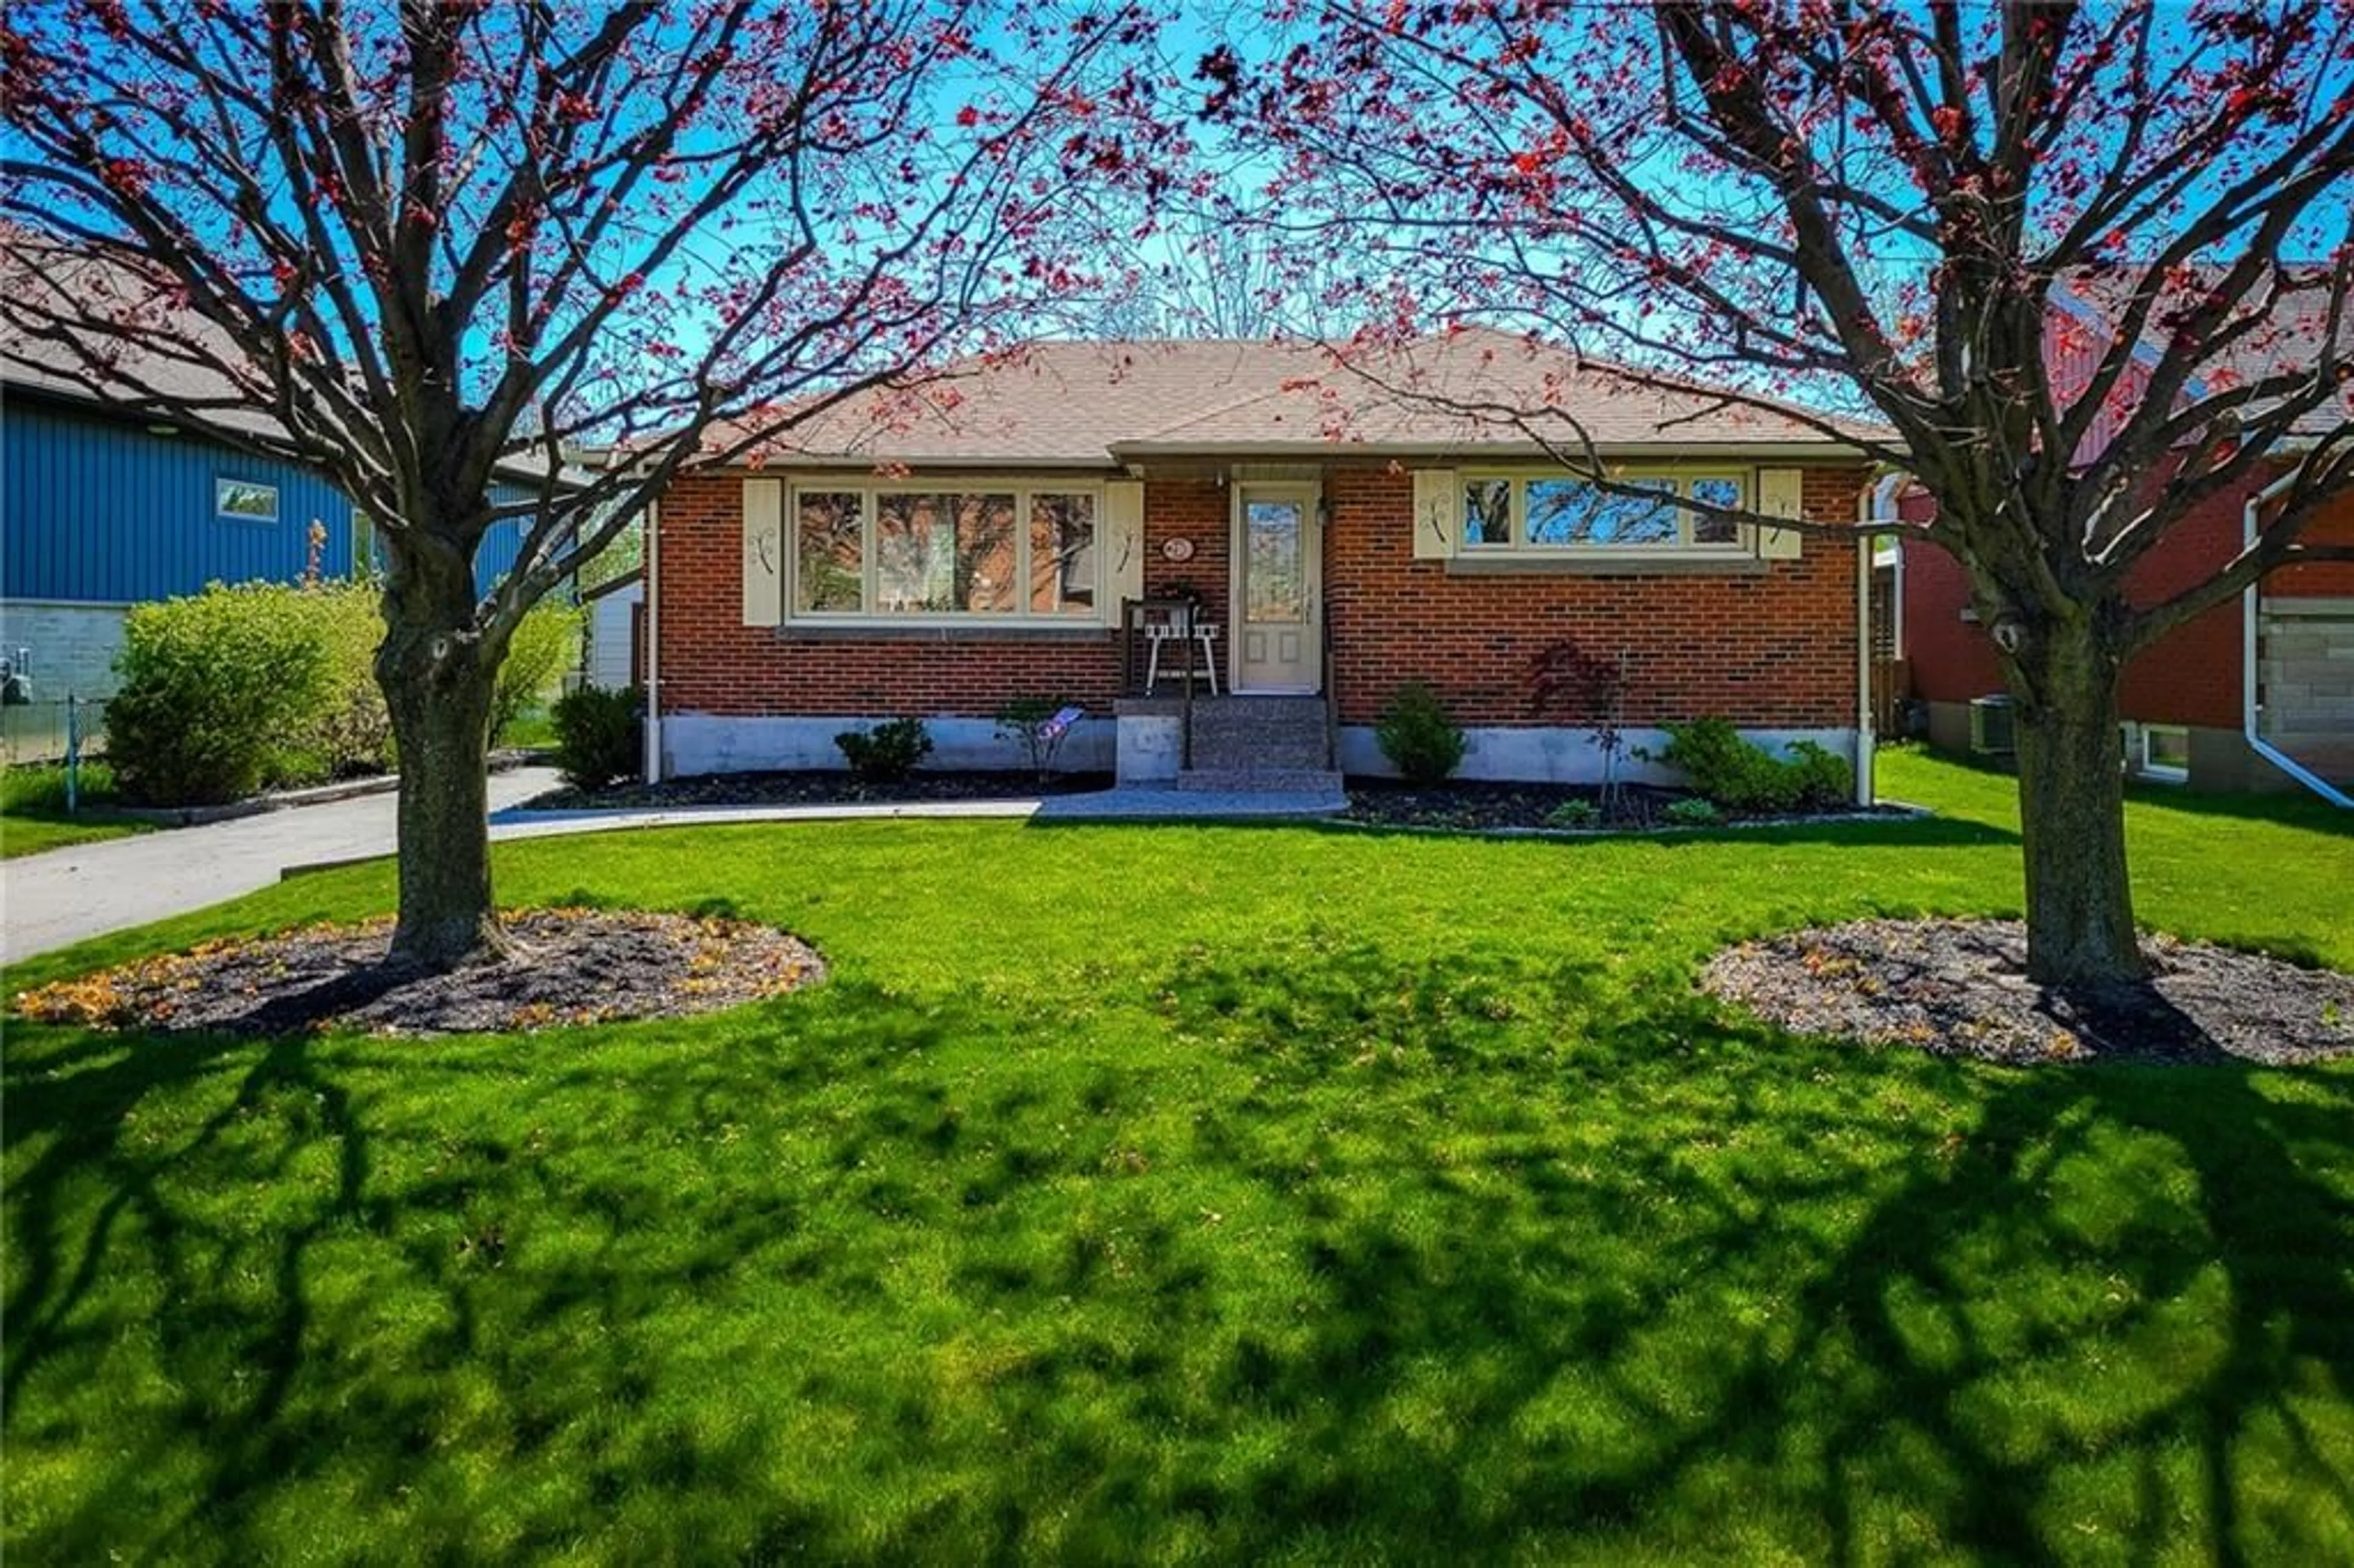 Home with brick exterior material for 210 Winona Rd, Stoney Creek Ontario L8E 5K4